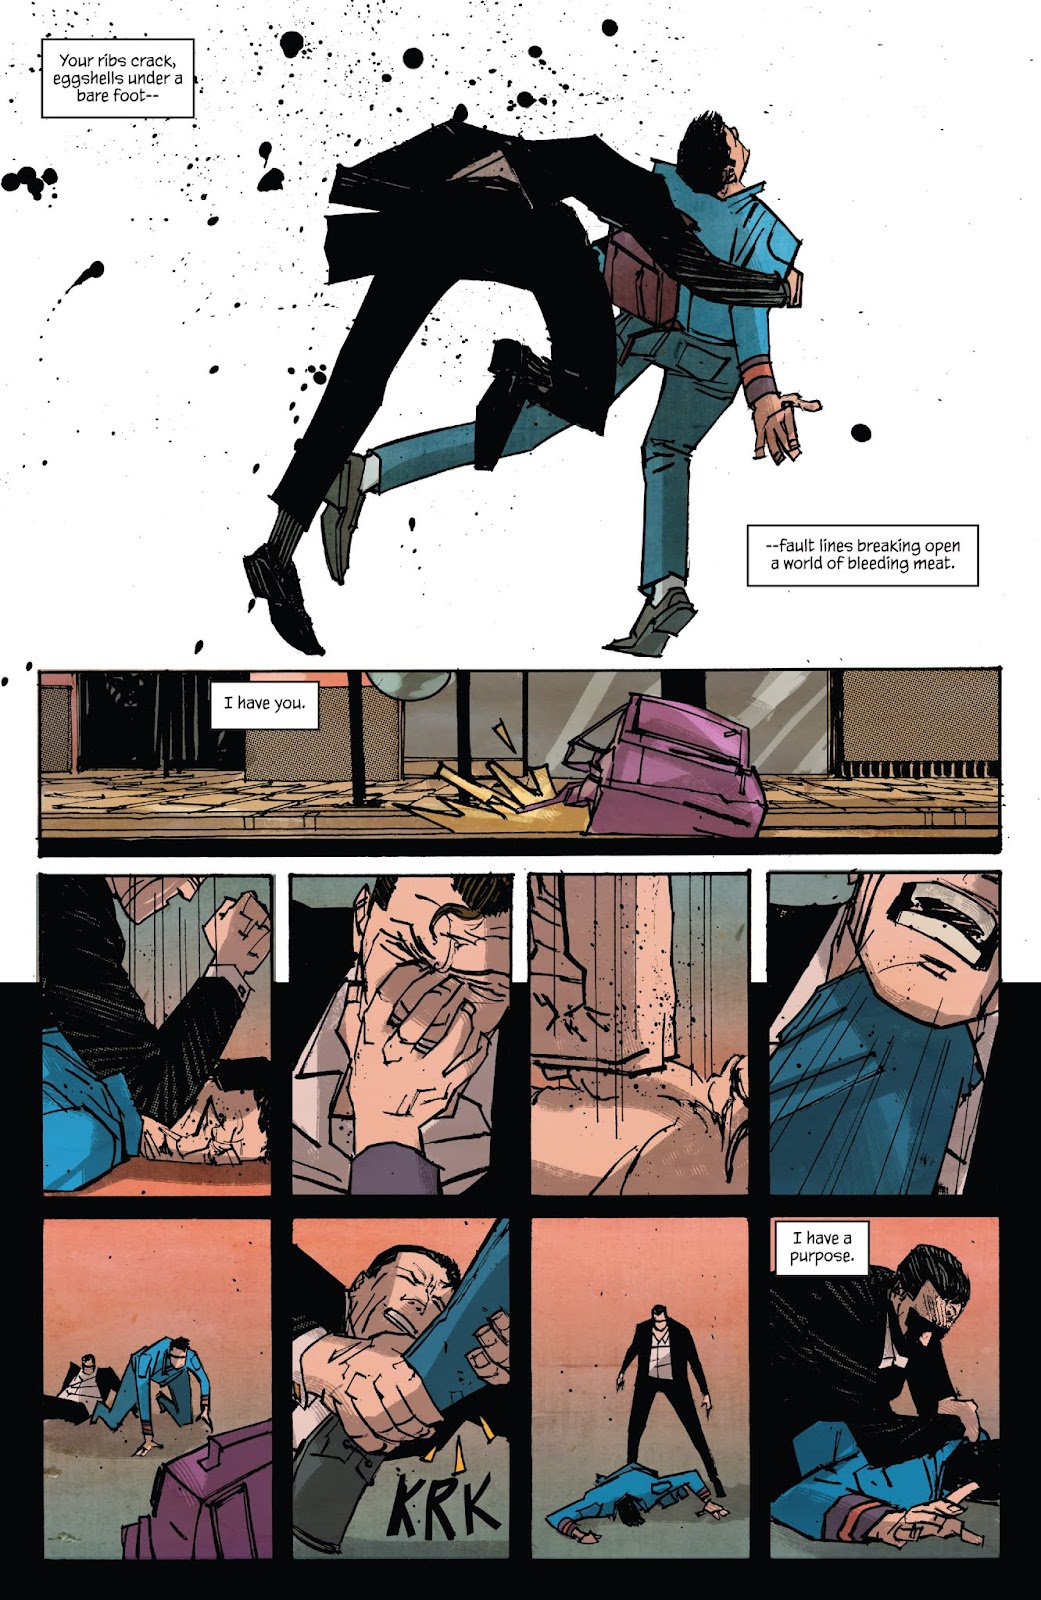 James Bond: The Body issue 5 - Page 12